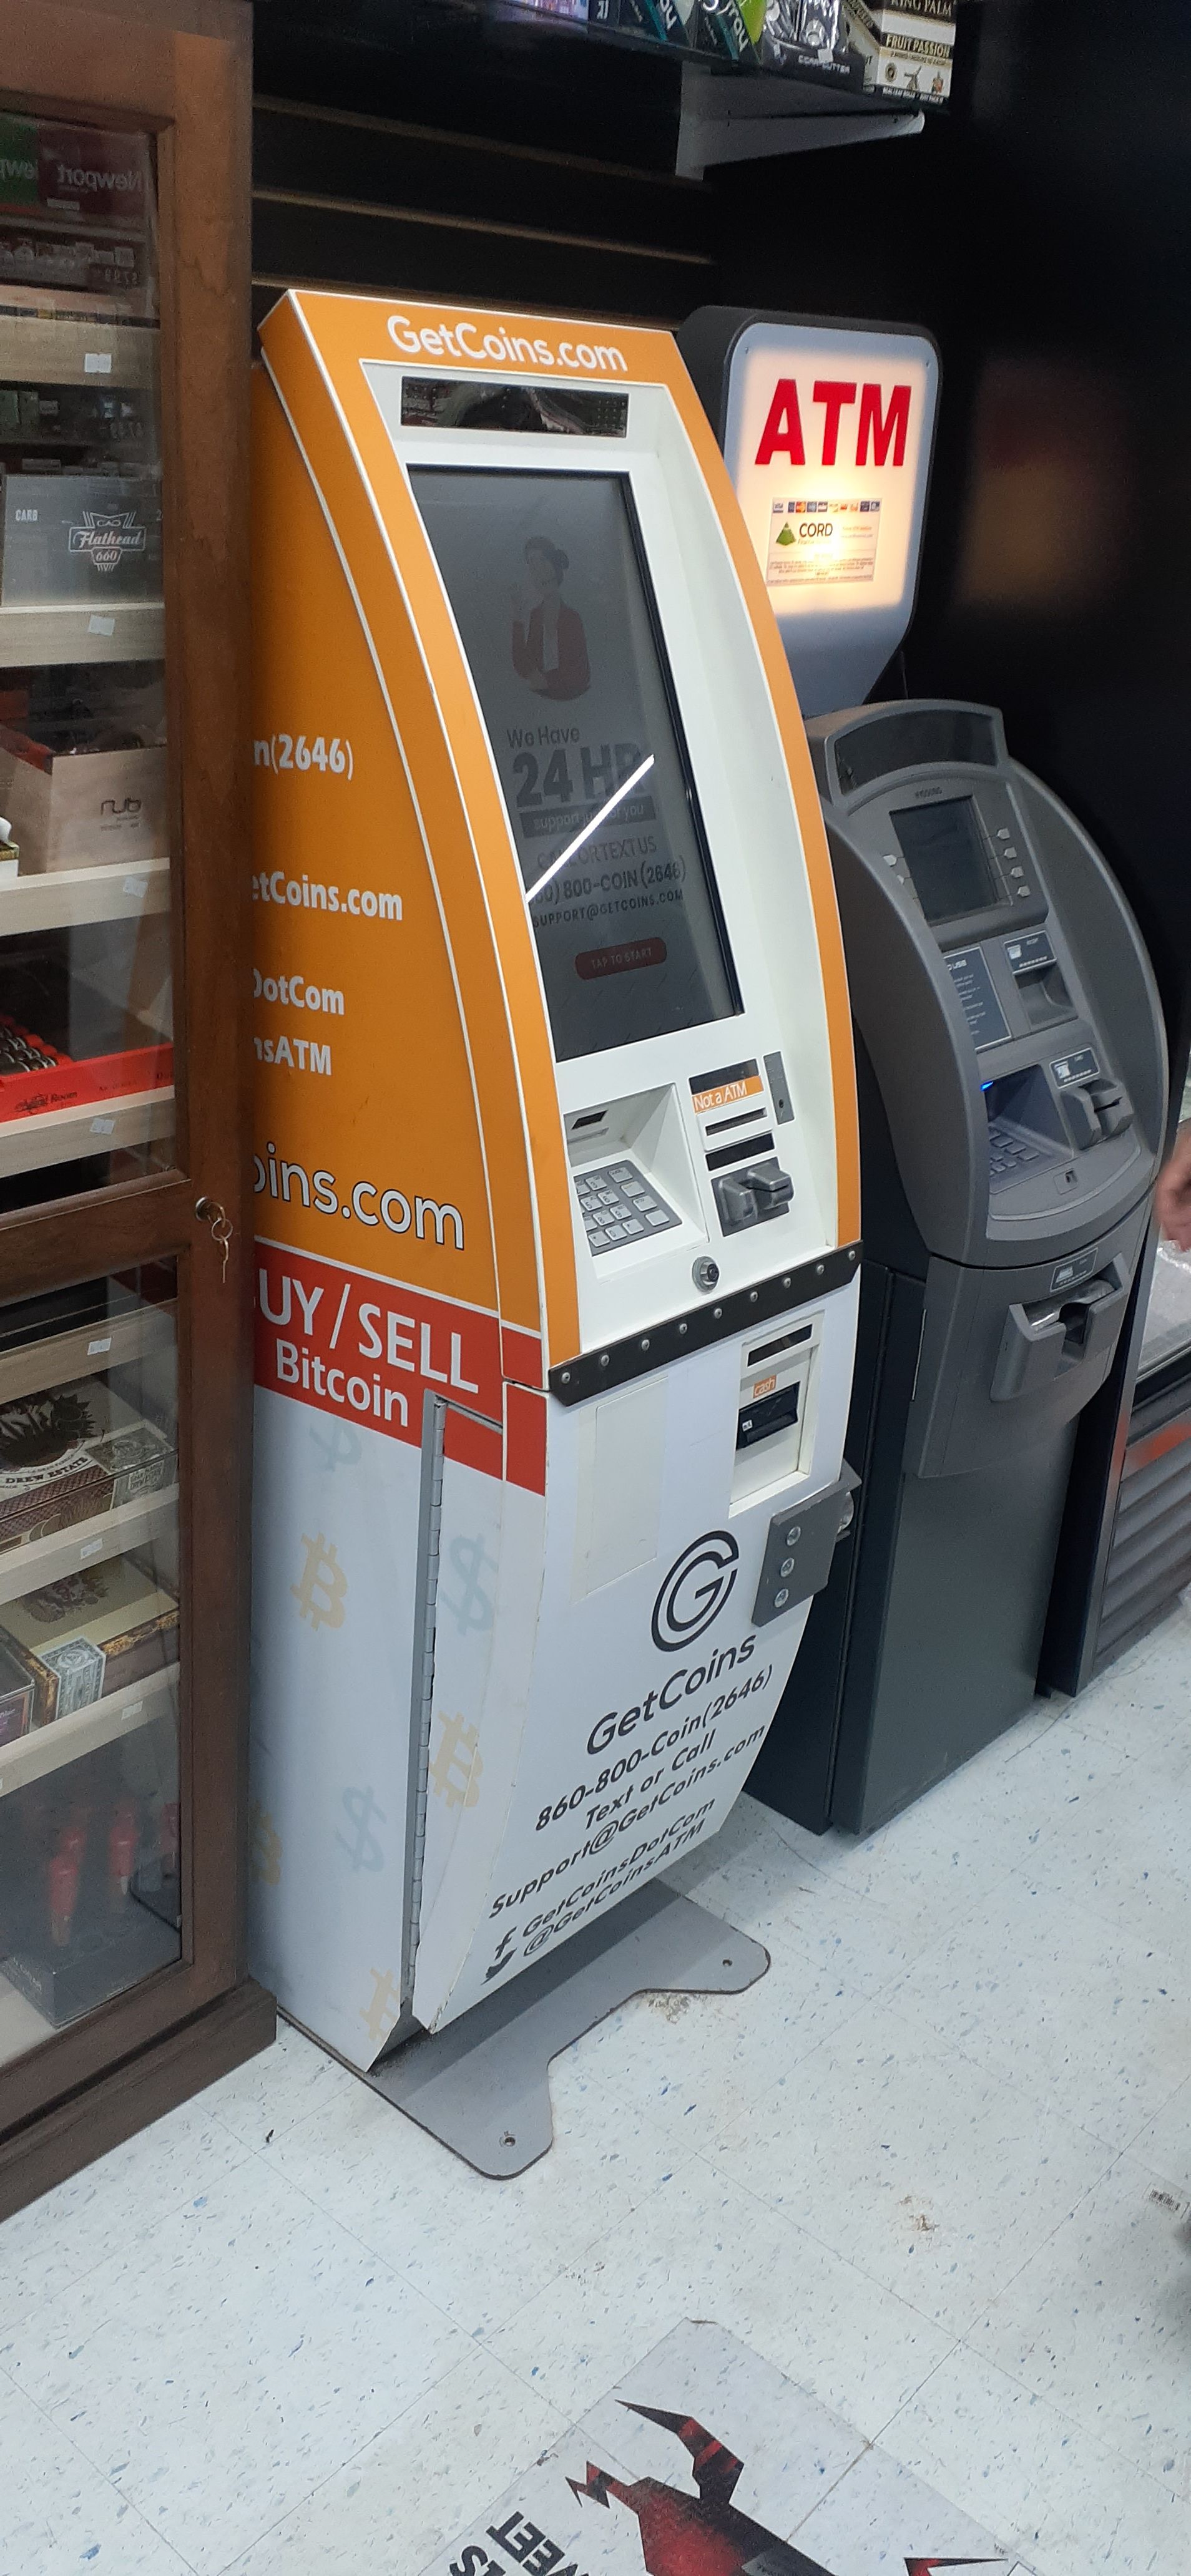 Getcoins - Bitcoin ATM - Inside of Smart Choice Smoke Shop & More in Temple, Texas